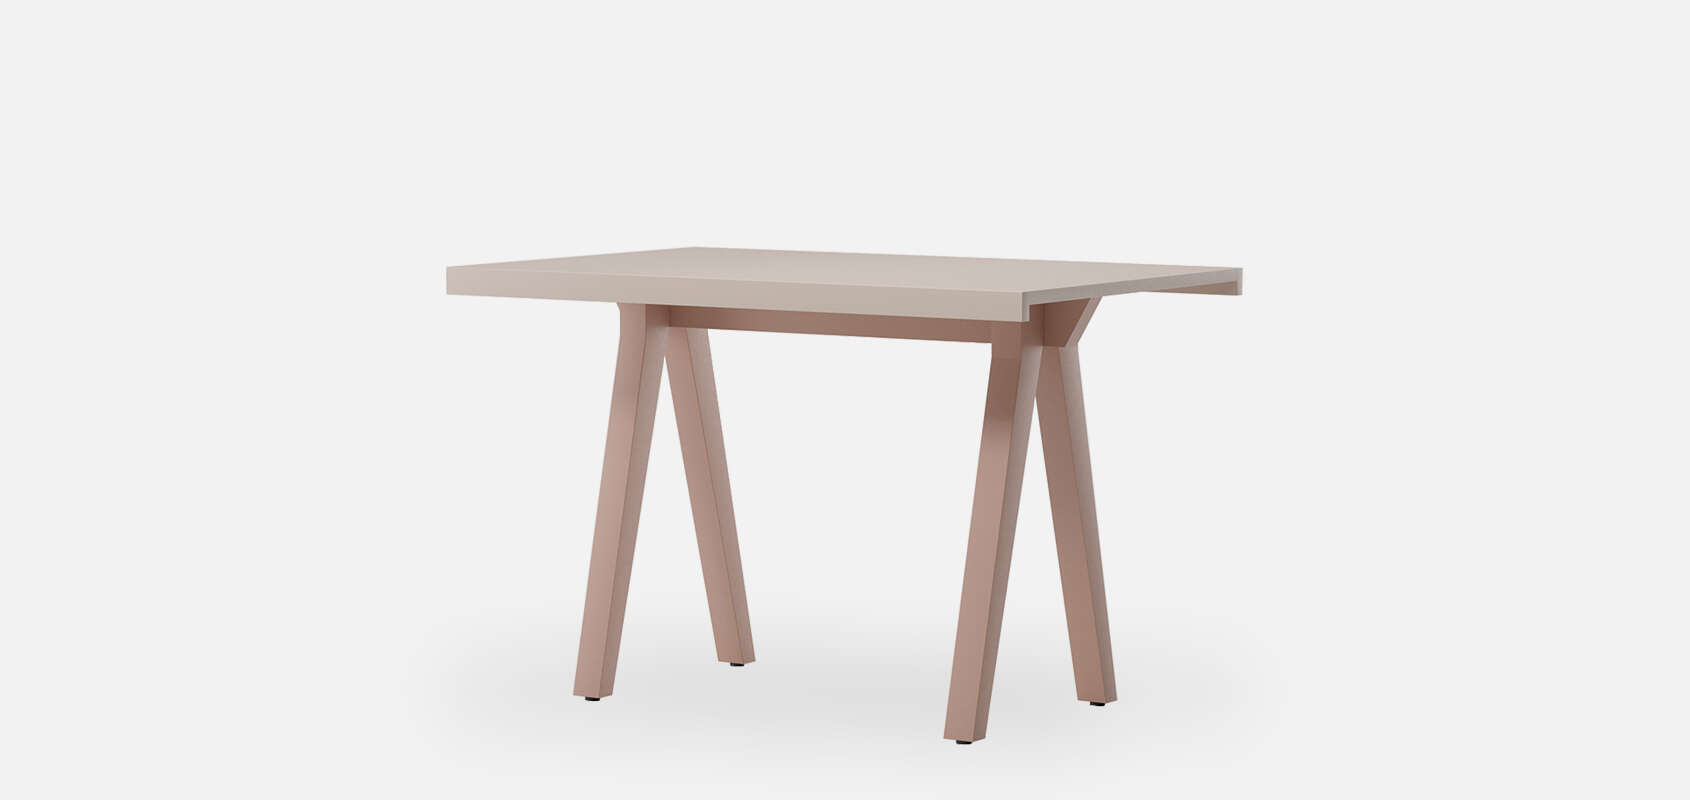 Vieques High Table - Small